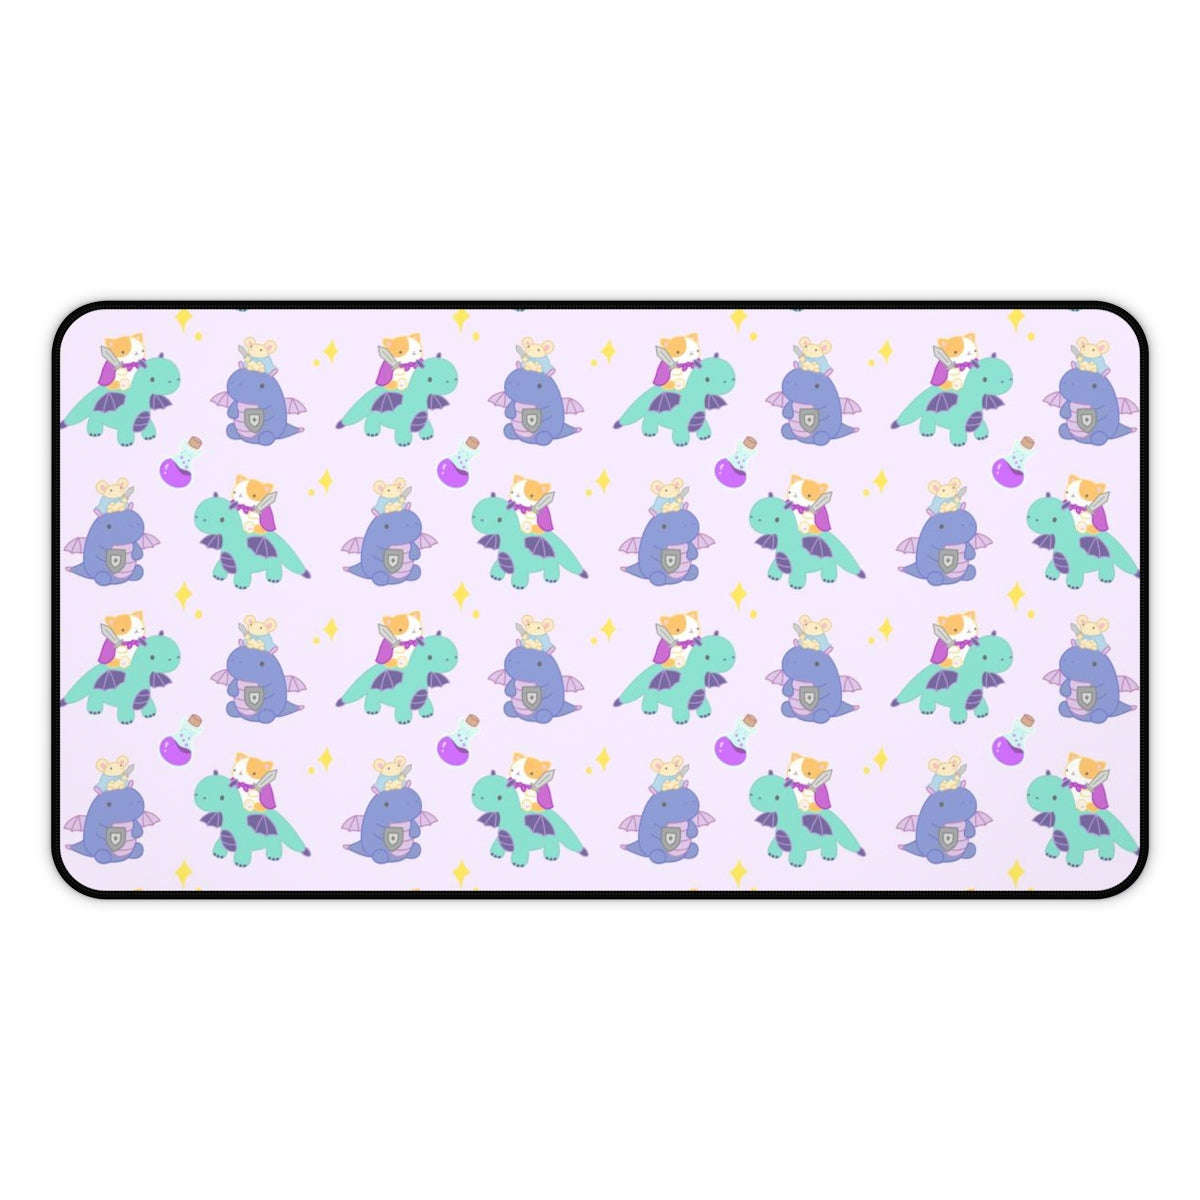 Cat and Mouse Dragon Knight Desk Mat - Large Mouse Pad by Wild Whimsy Woolies